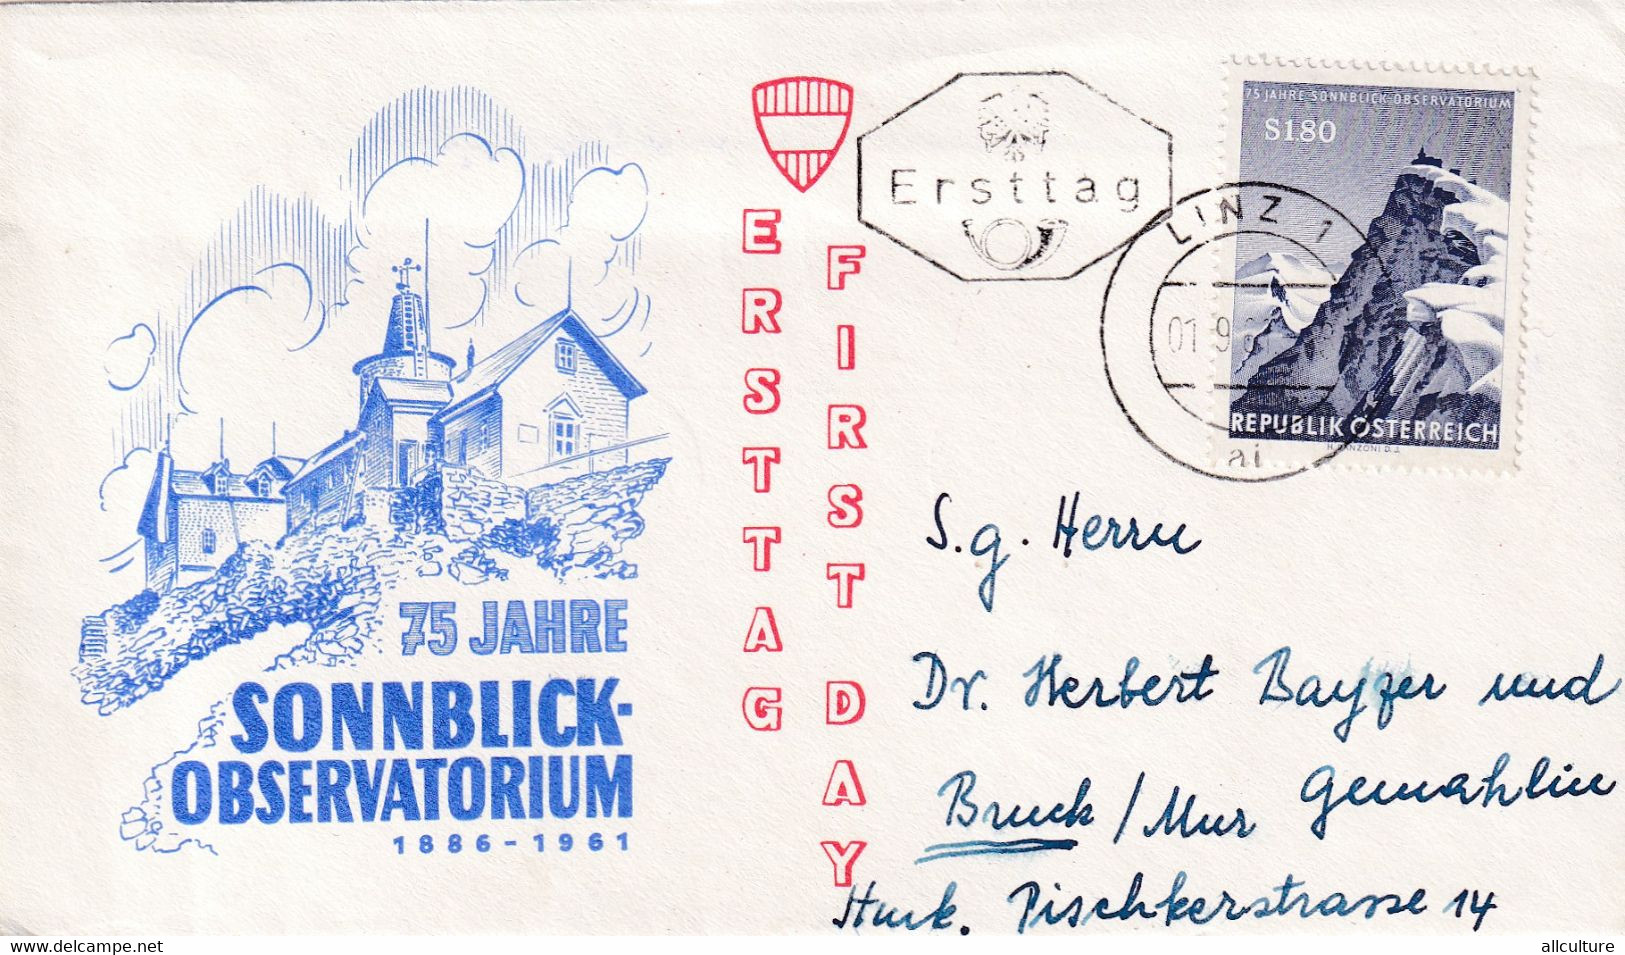 A8384- SONNBLICK OBSERVATORIUM ERSTTAG 1886-1961, LINZ 1961 REPUBLIK OESTERREICH USED STAMP ON COVER - Lettres & Documents